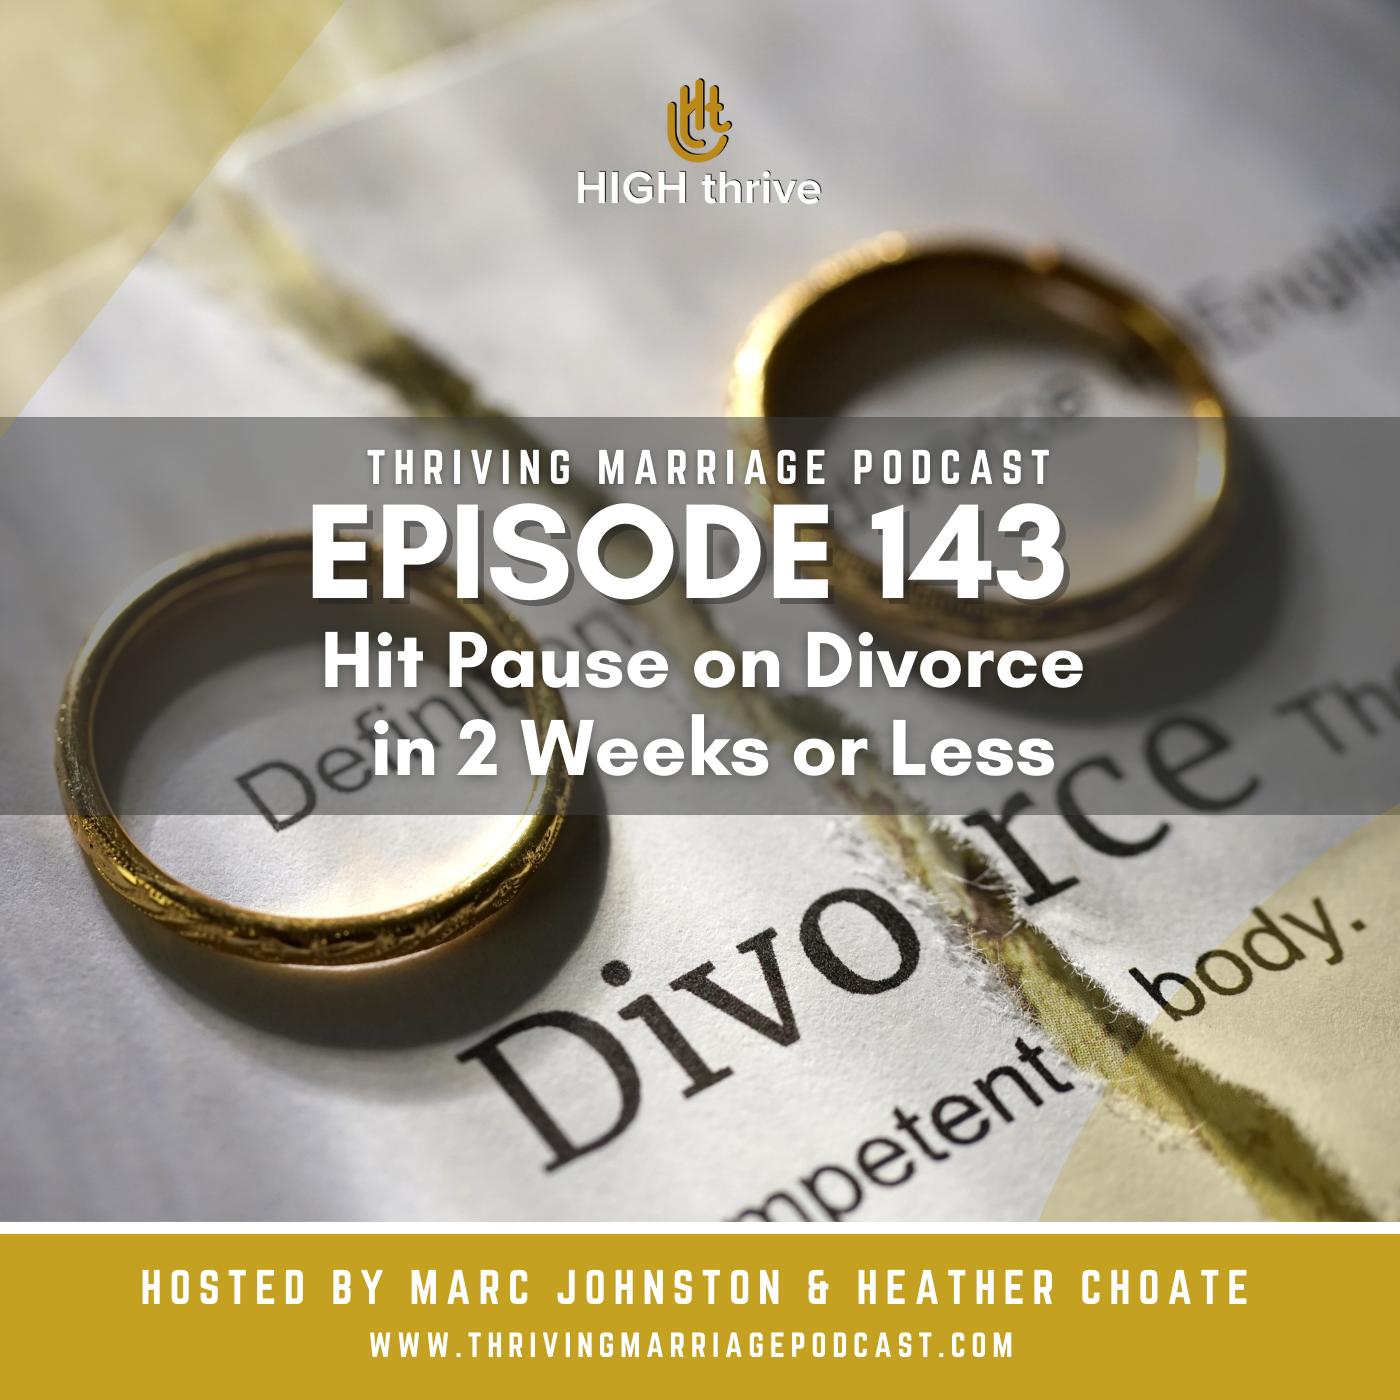 Episode 143: Hit Pause on Divorce in 2 Weeks or Less